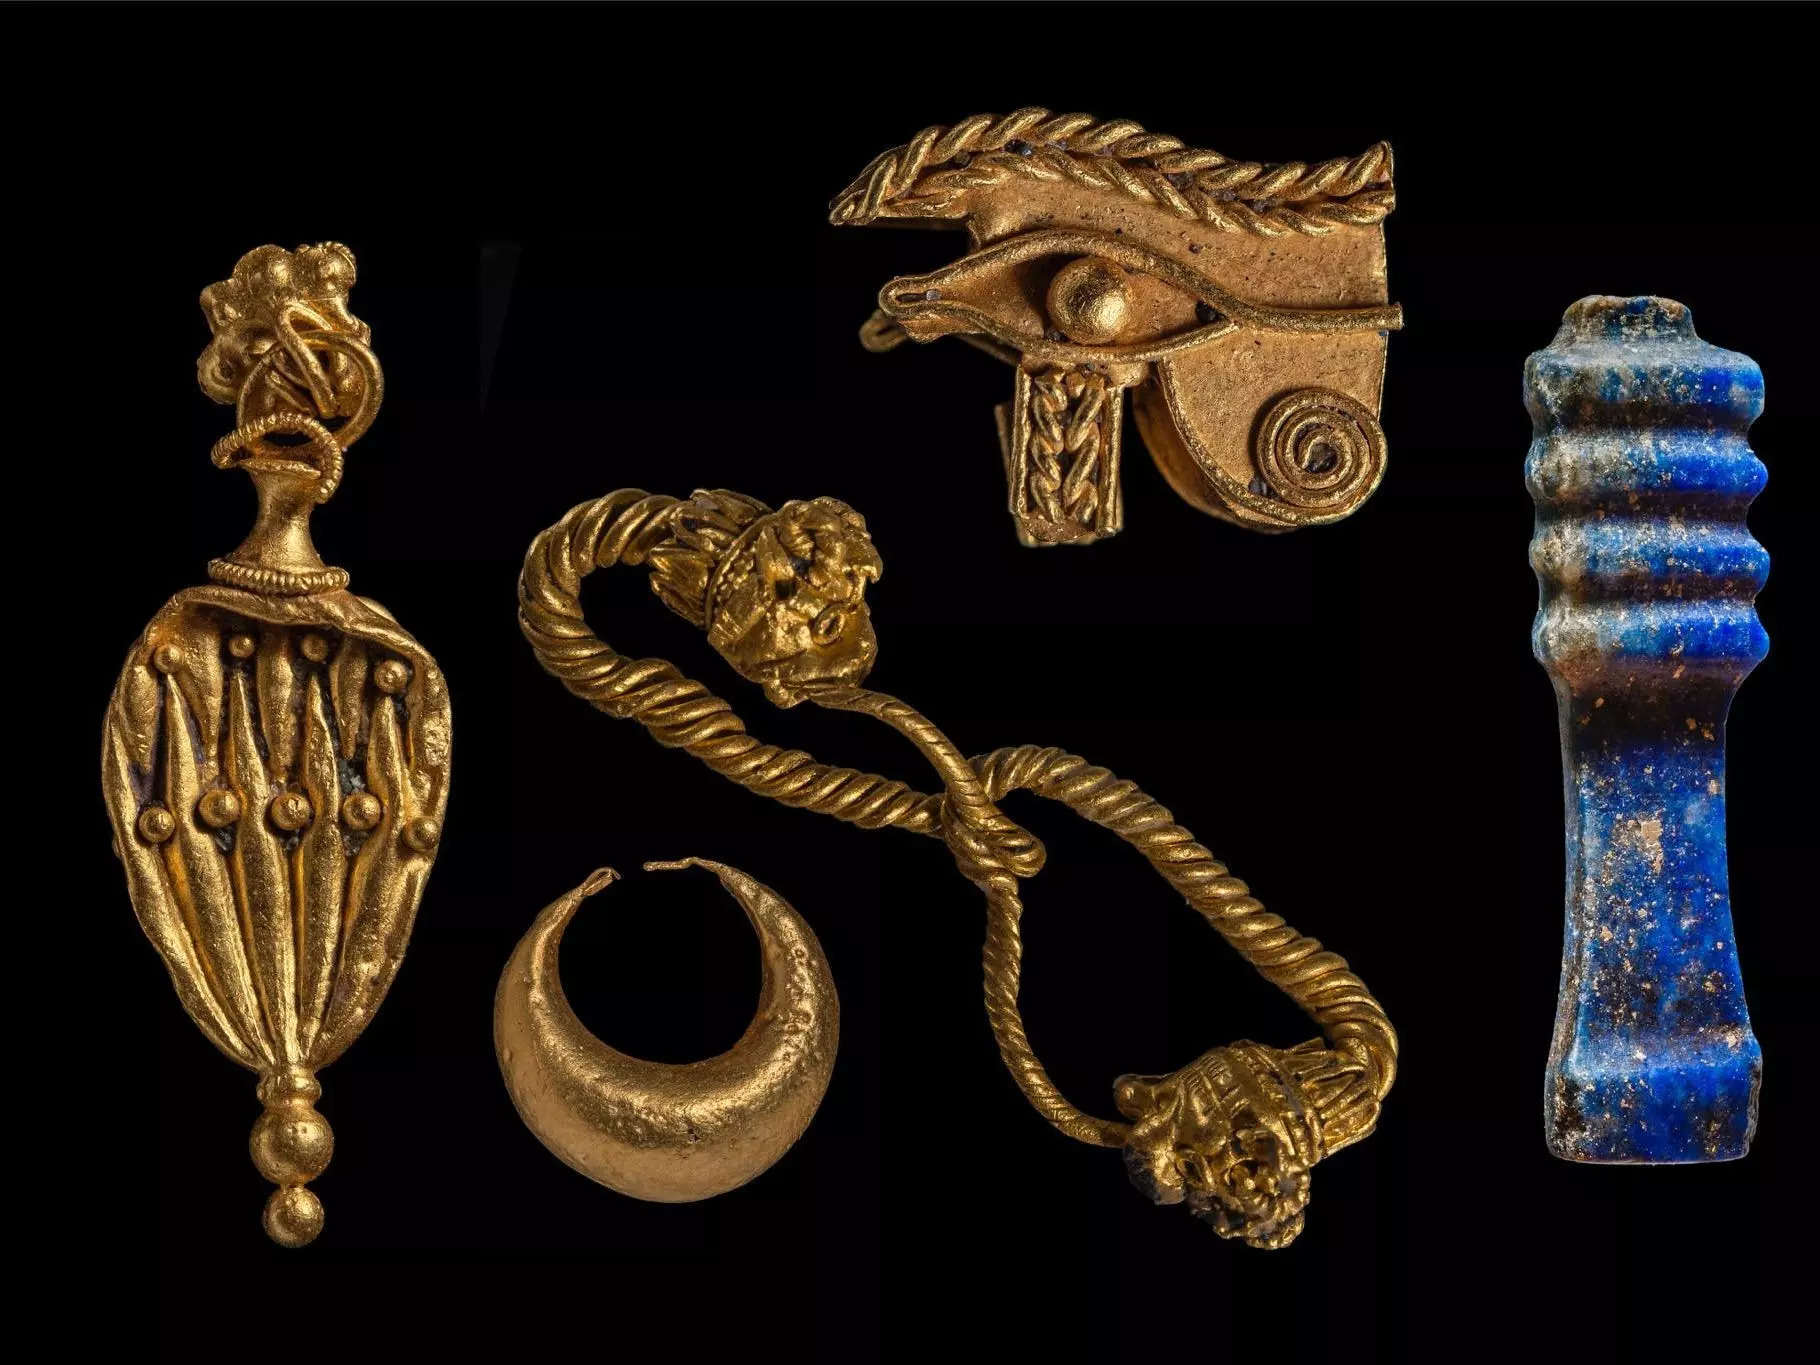 Gold jewelry and Egyptian symbols are shown here, next to a Lapis-Lazuli sculpture.